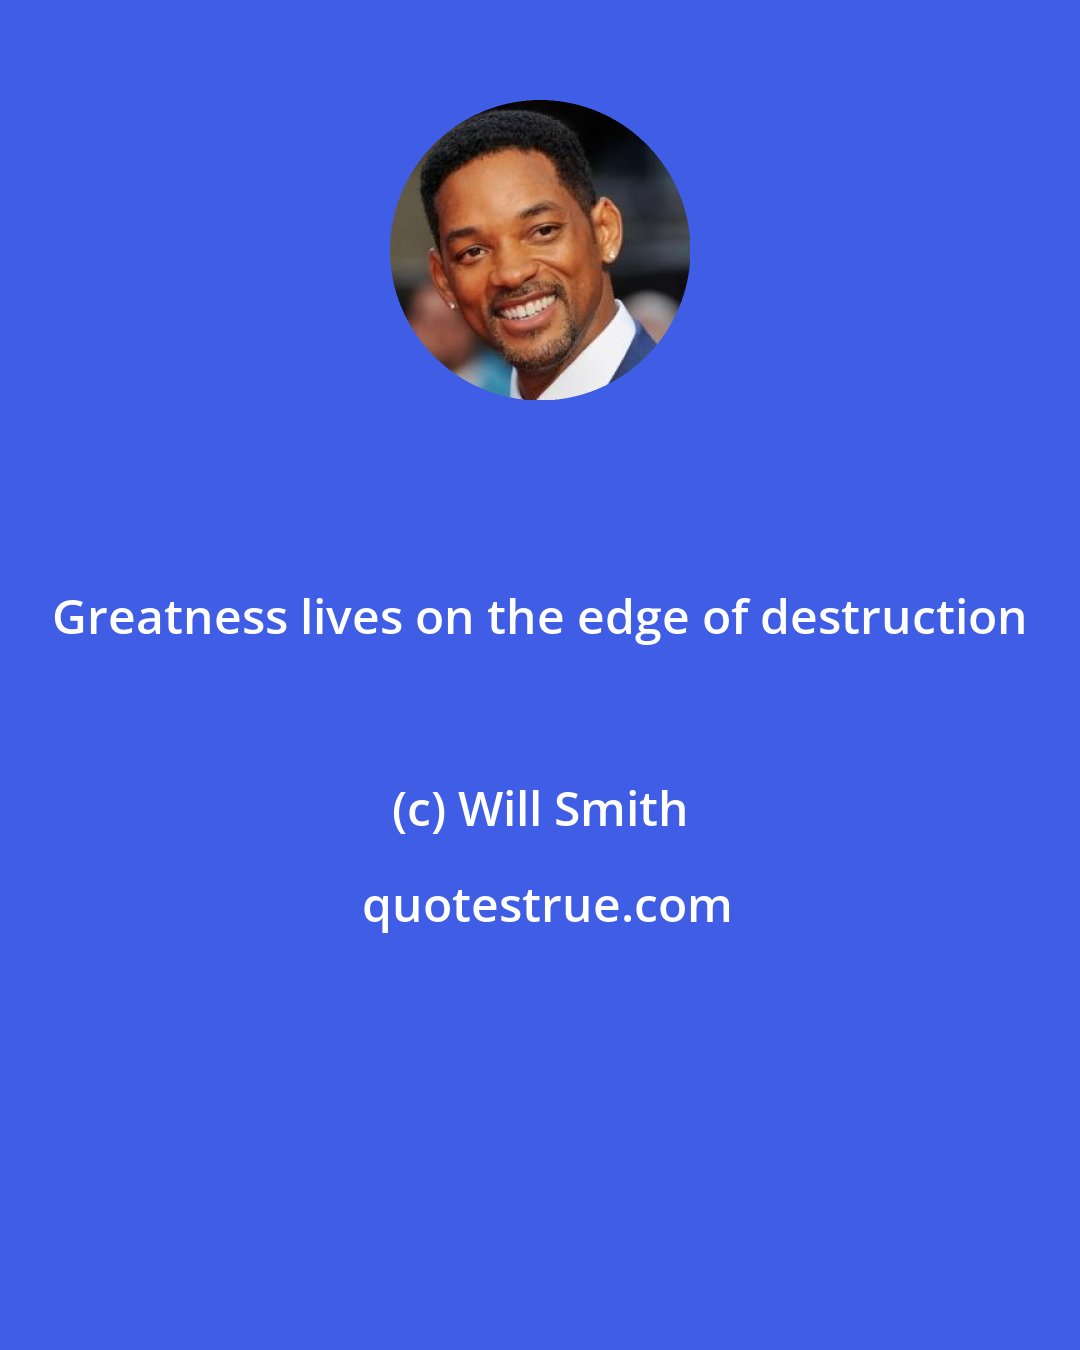 Will Smith: Greatness lives on the edge of destruction